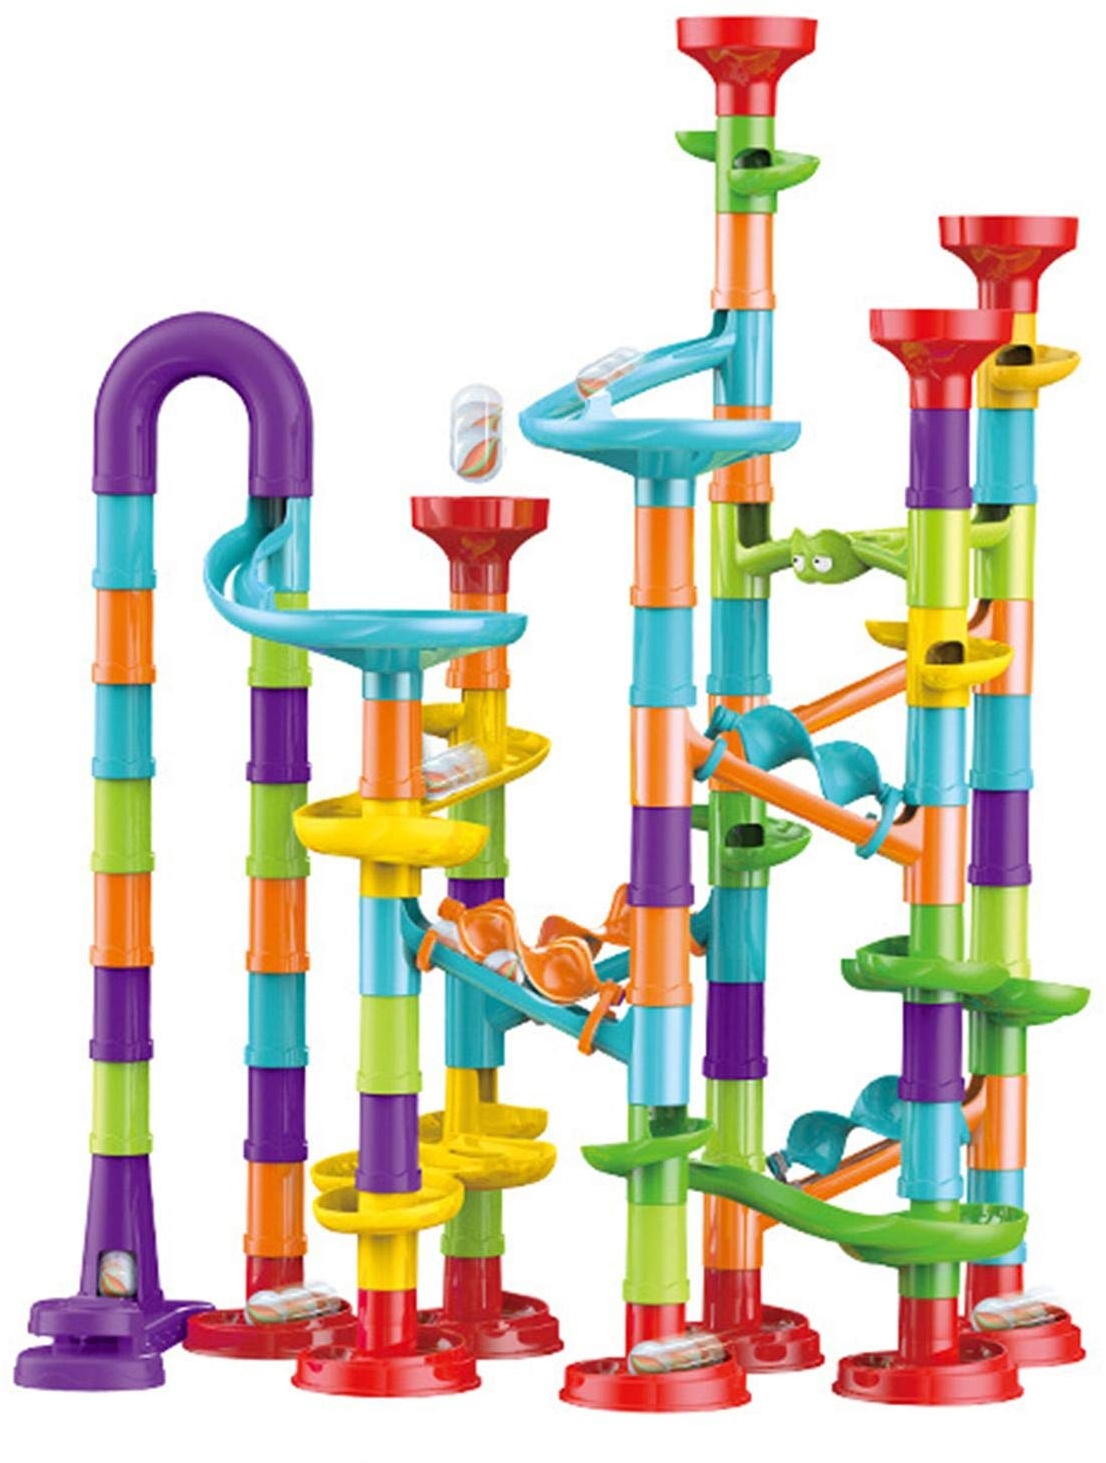 duhe189014 113 Teile Upgrade Marble Run Toy Track Set, DIY Marble Genius Run Super Set, Marble Track Stitching Set, Marble Race Track für Kinder mit Glass Marbles Fun Learning Toy